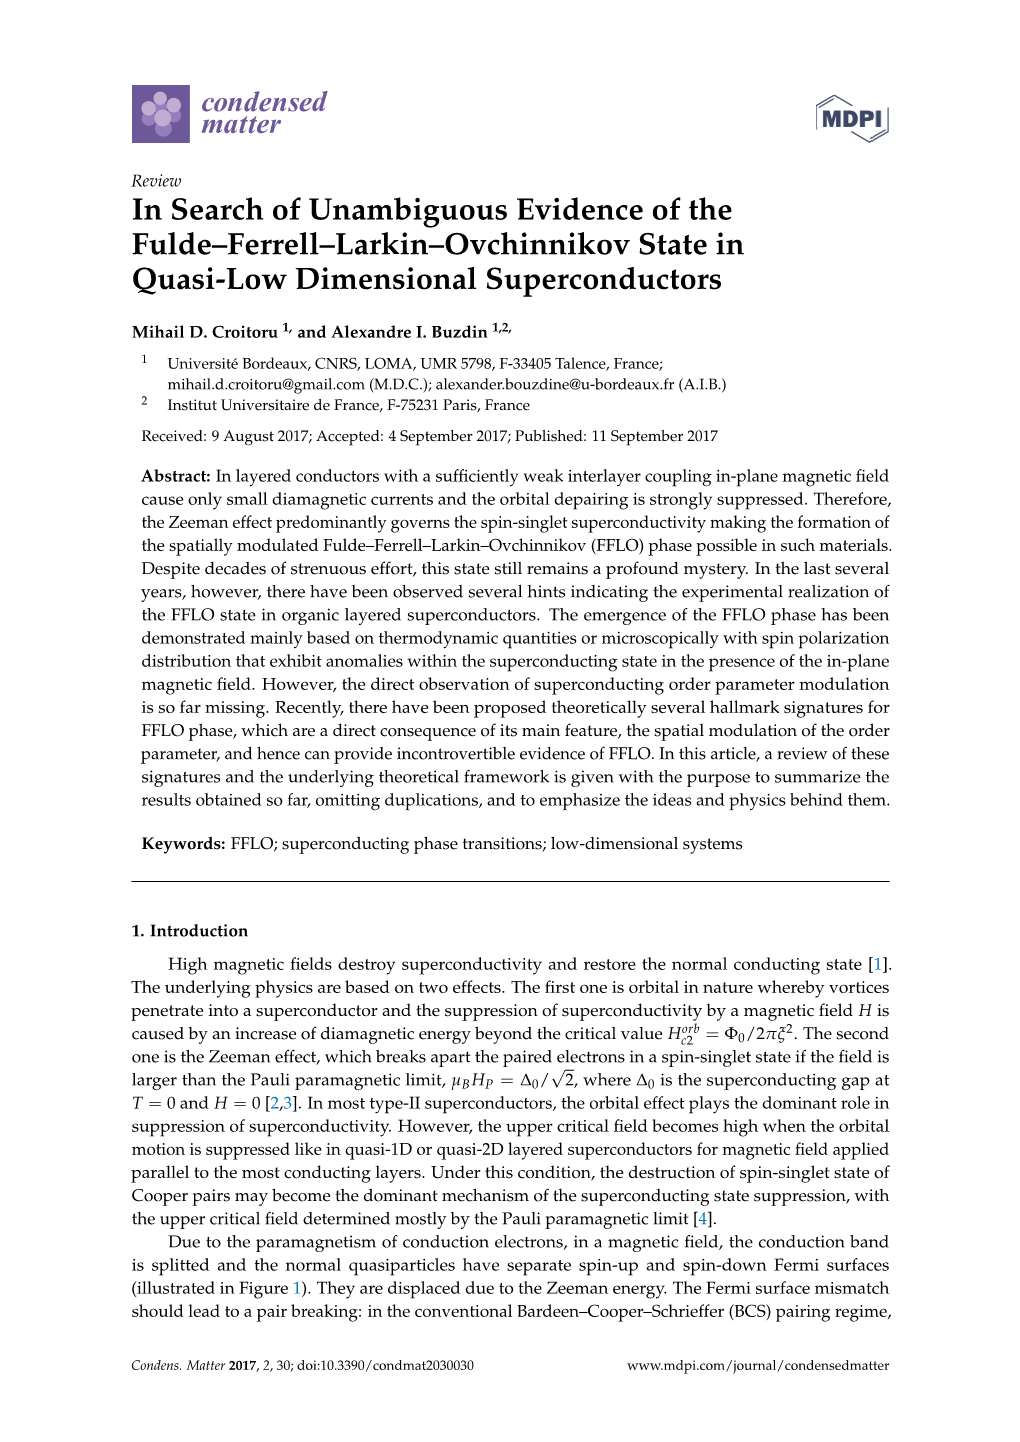 In Search of Unambiguous Evidence of the Fulde–Ferrell–Larkin–Ovchinnikov State in Quasi-Low Dimensional Superconductors